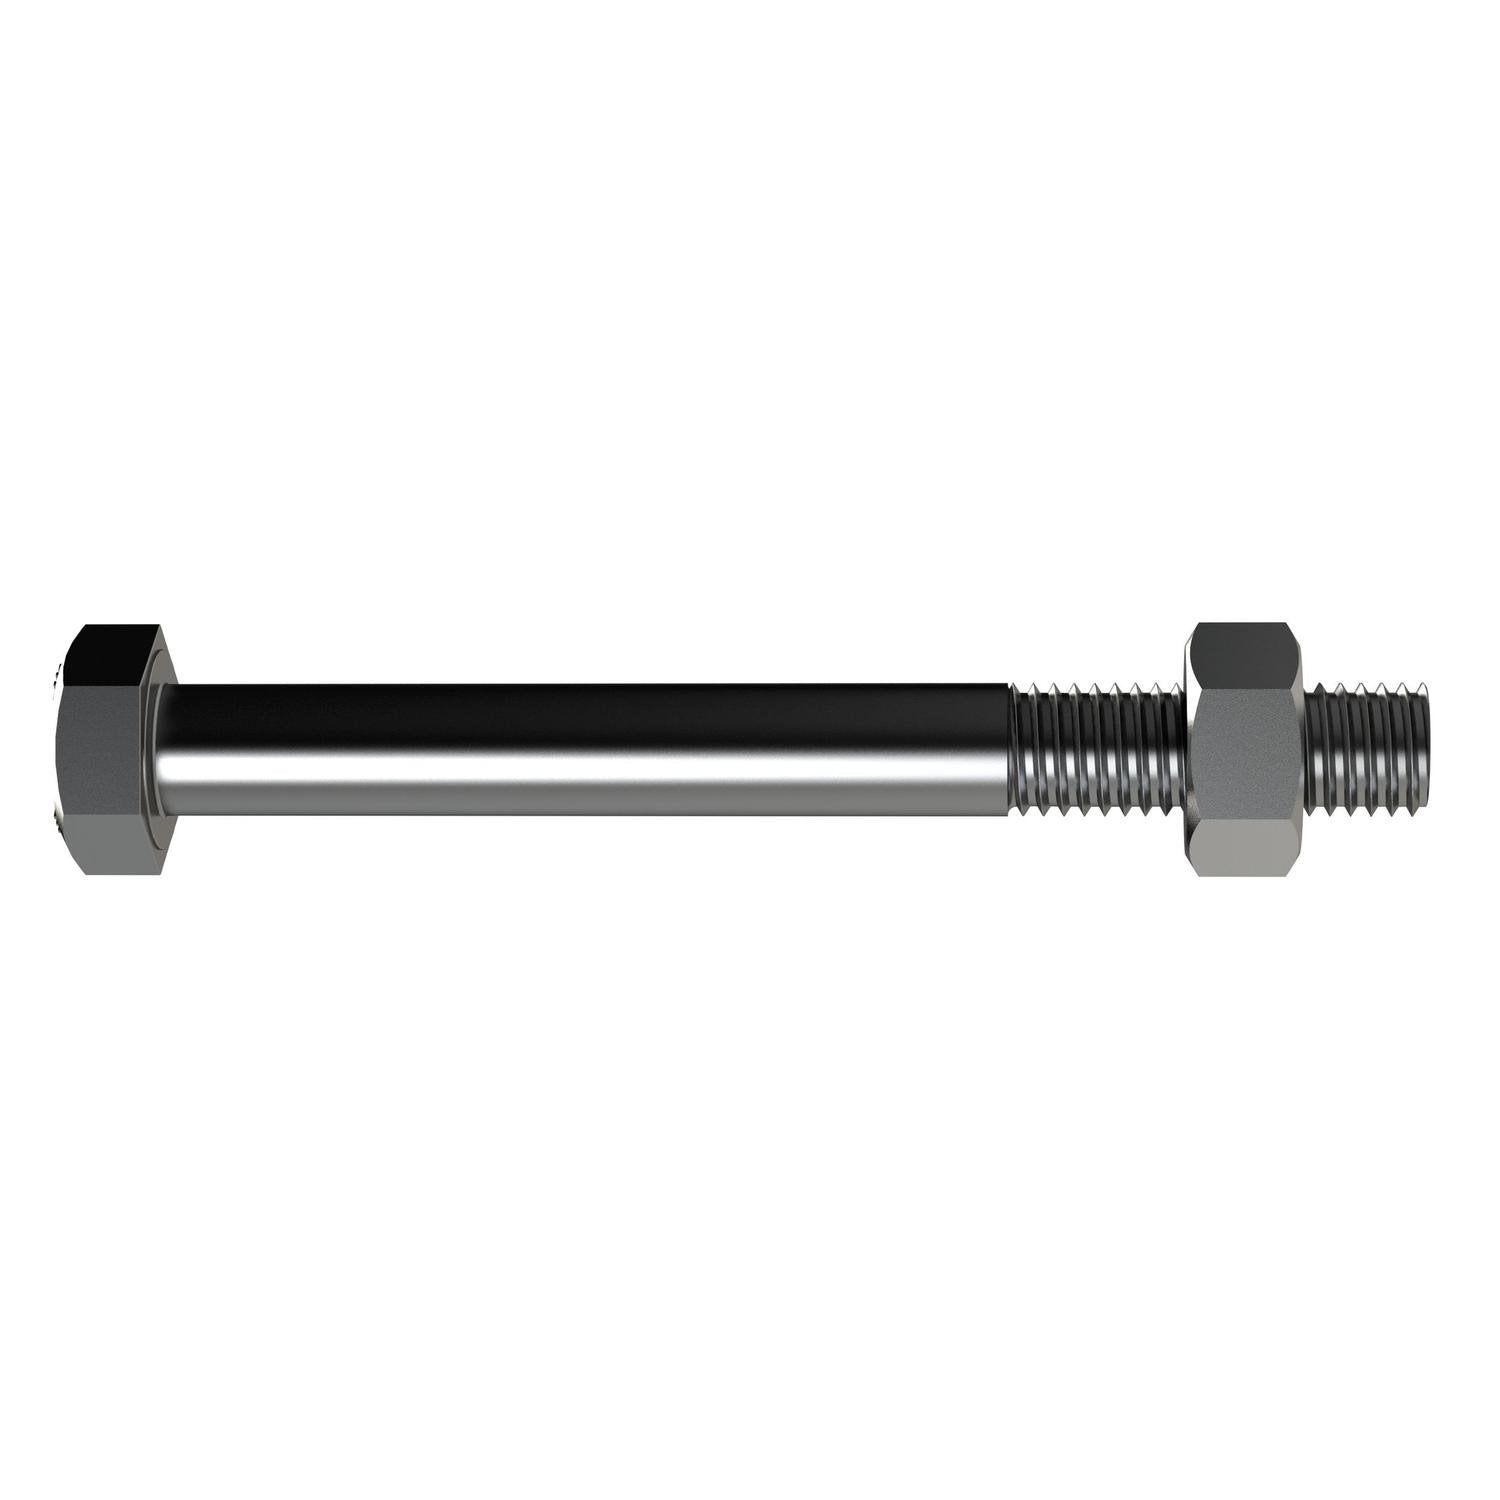 Bremick Engineer Bolt & Nut M16 X 300Mm Stainless Steel